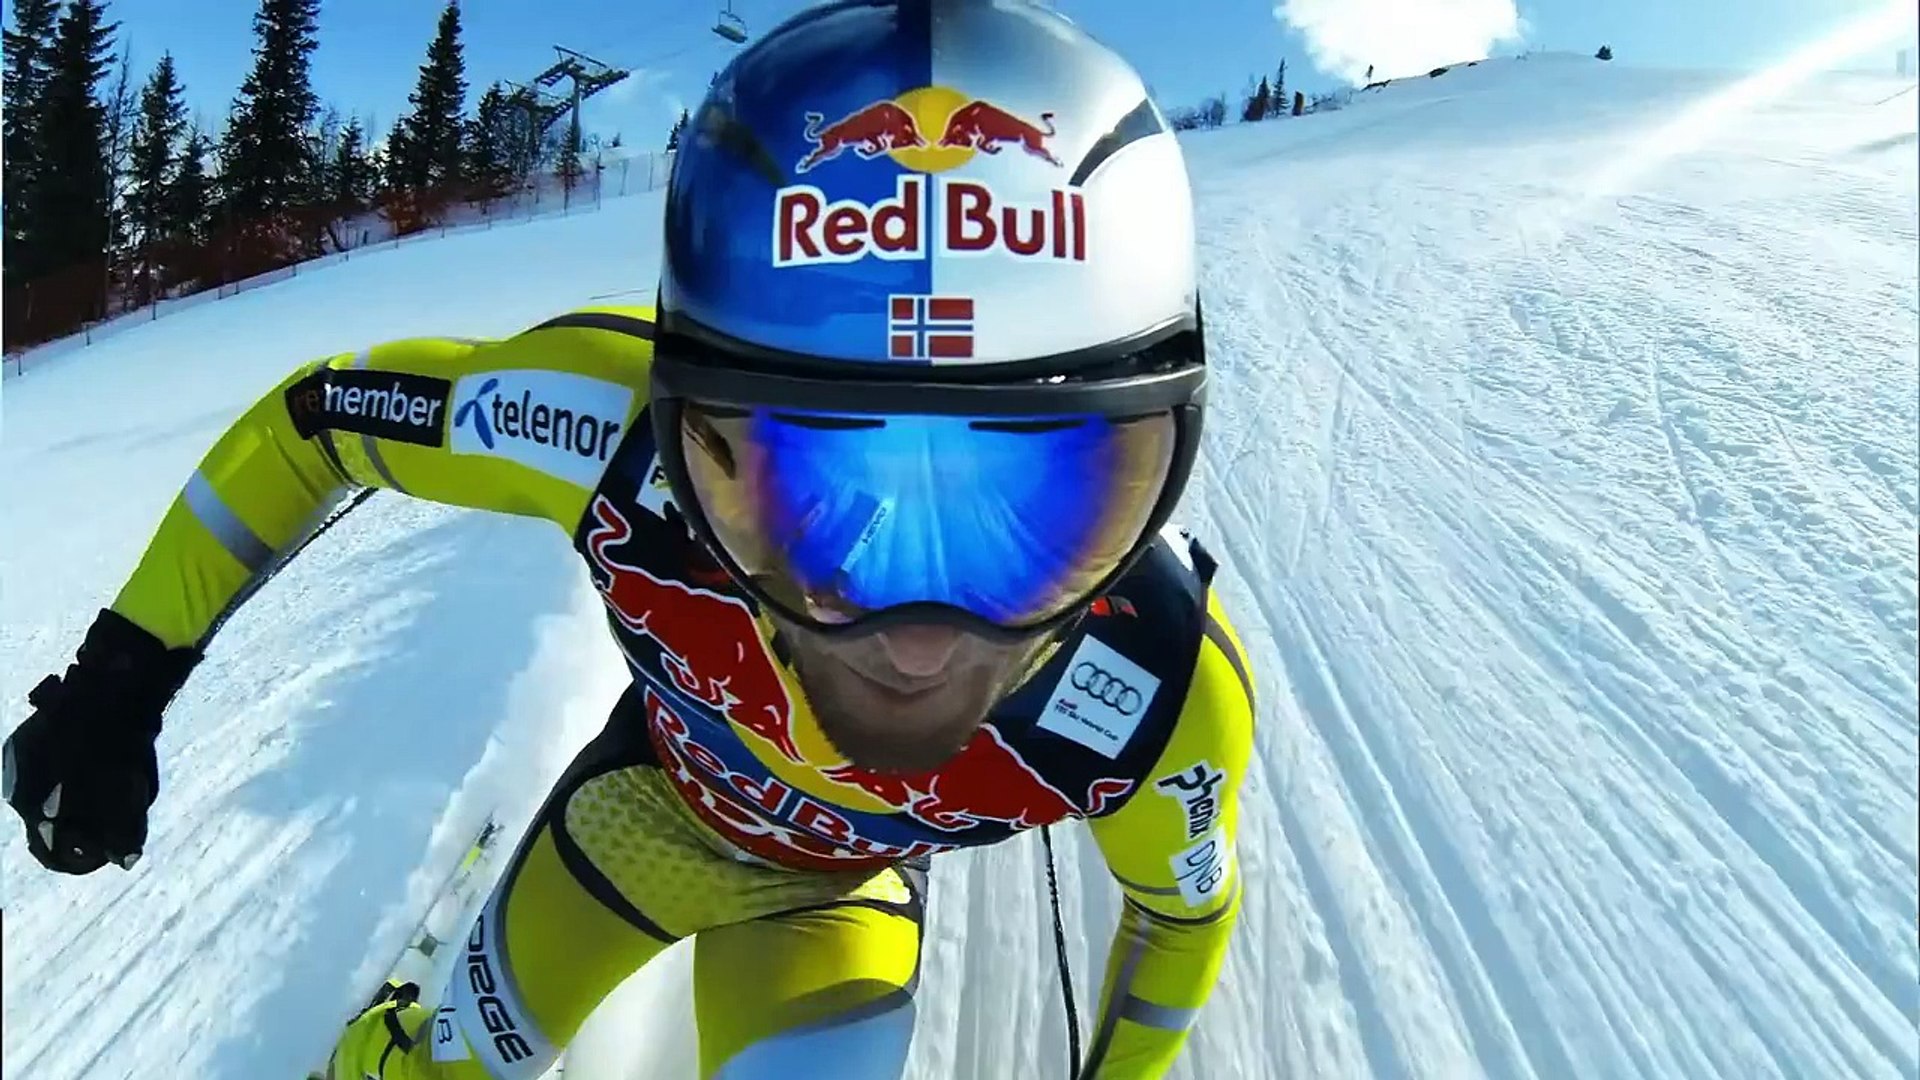 BLINK OF AN EYE AKSEL LUND SVINDAL - Dailymotion Video